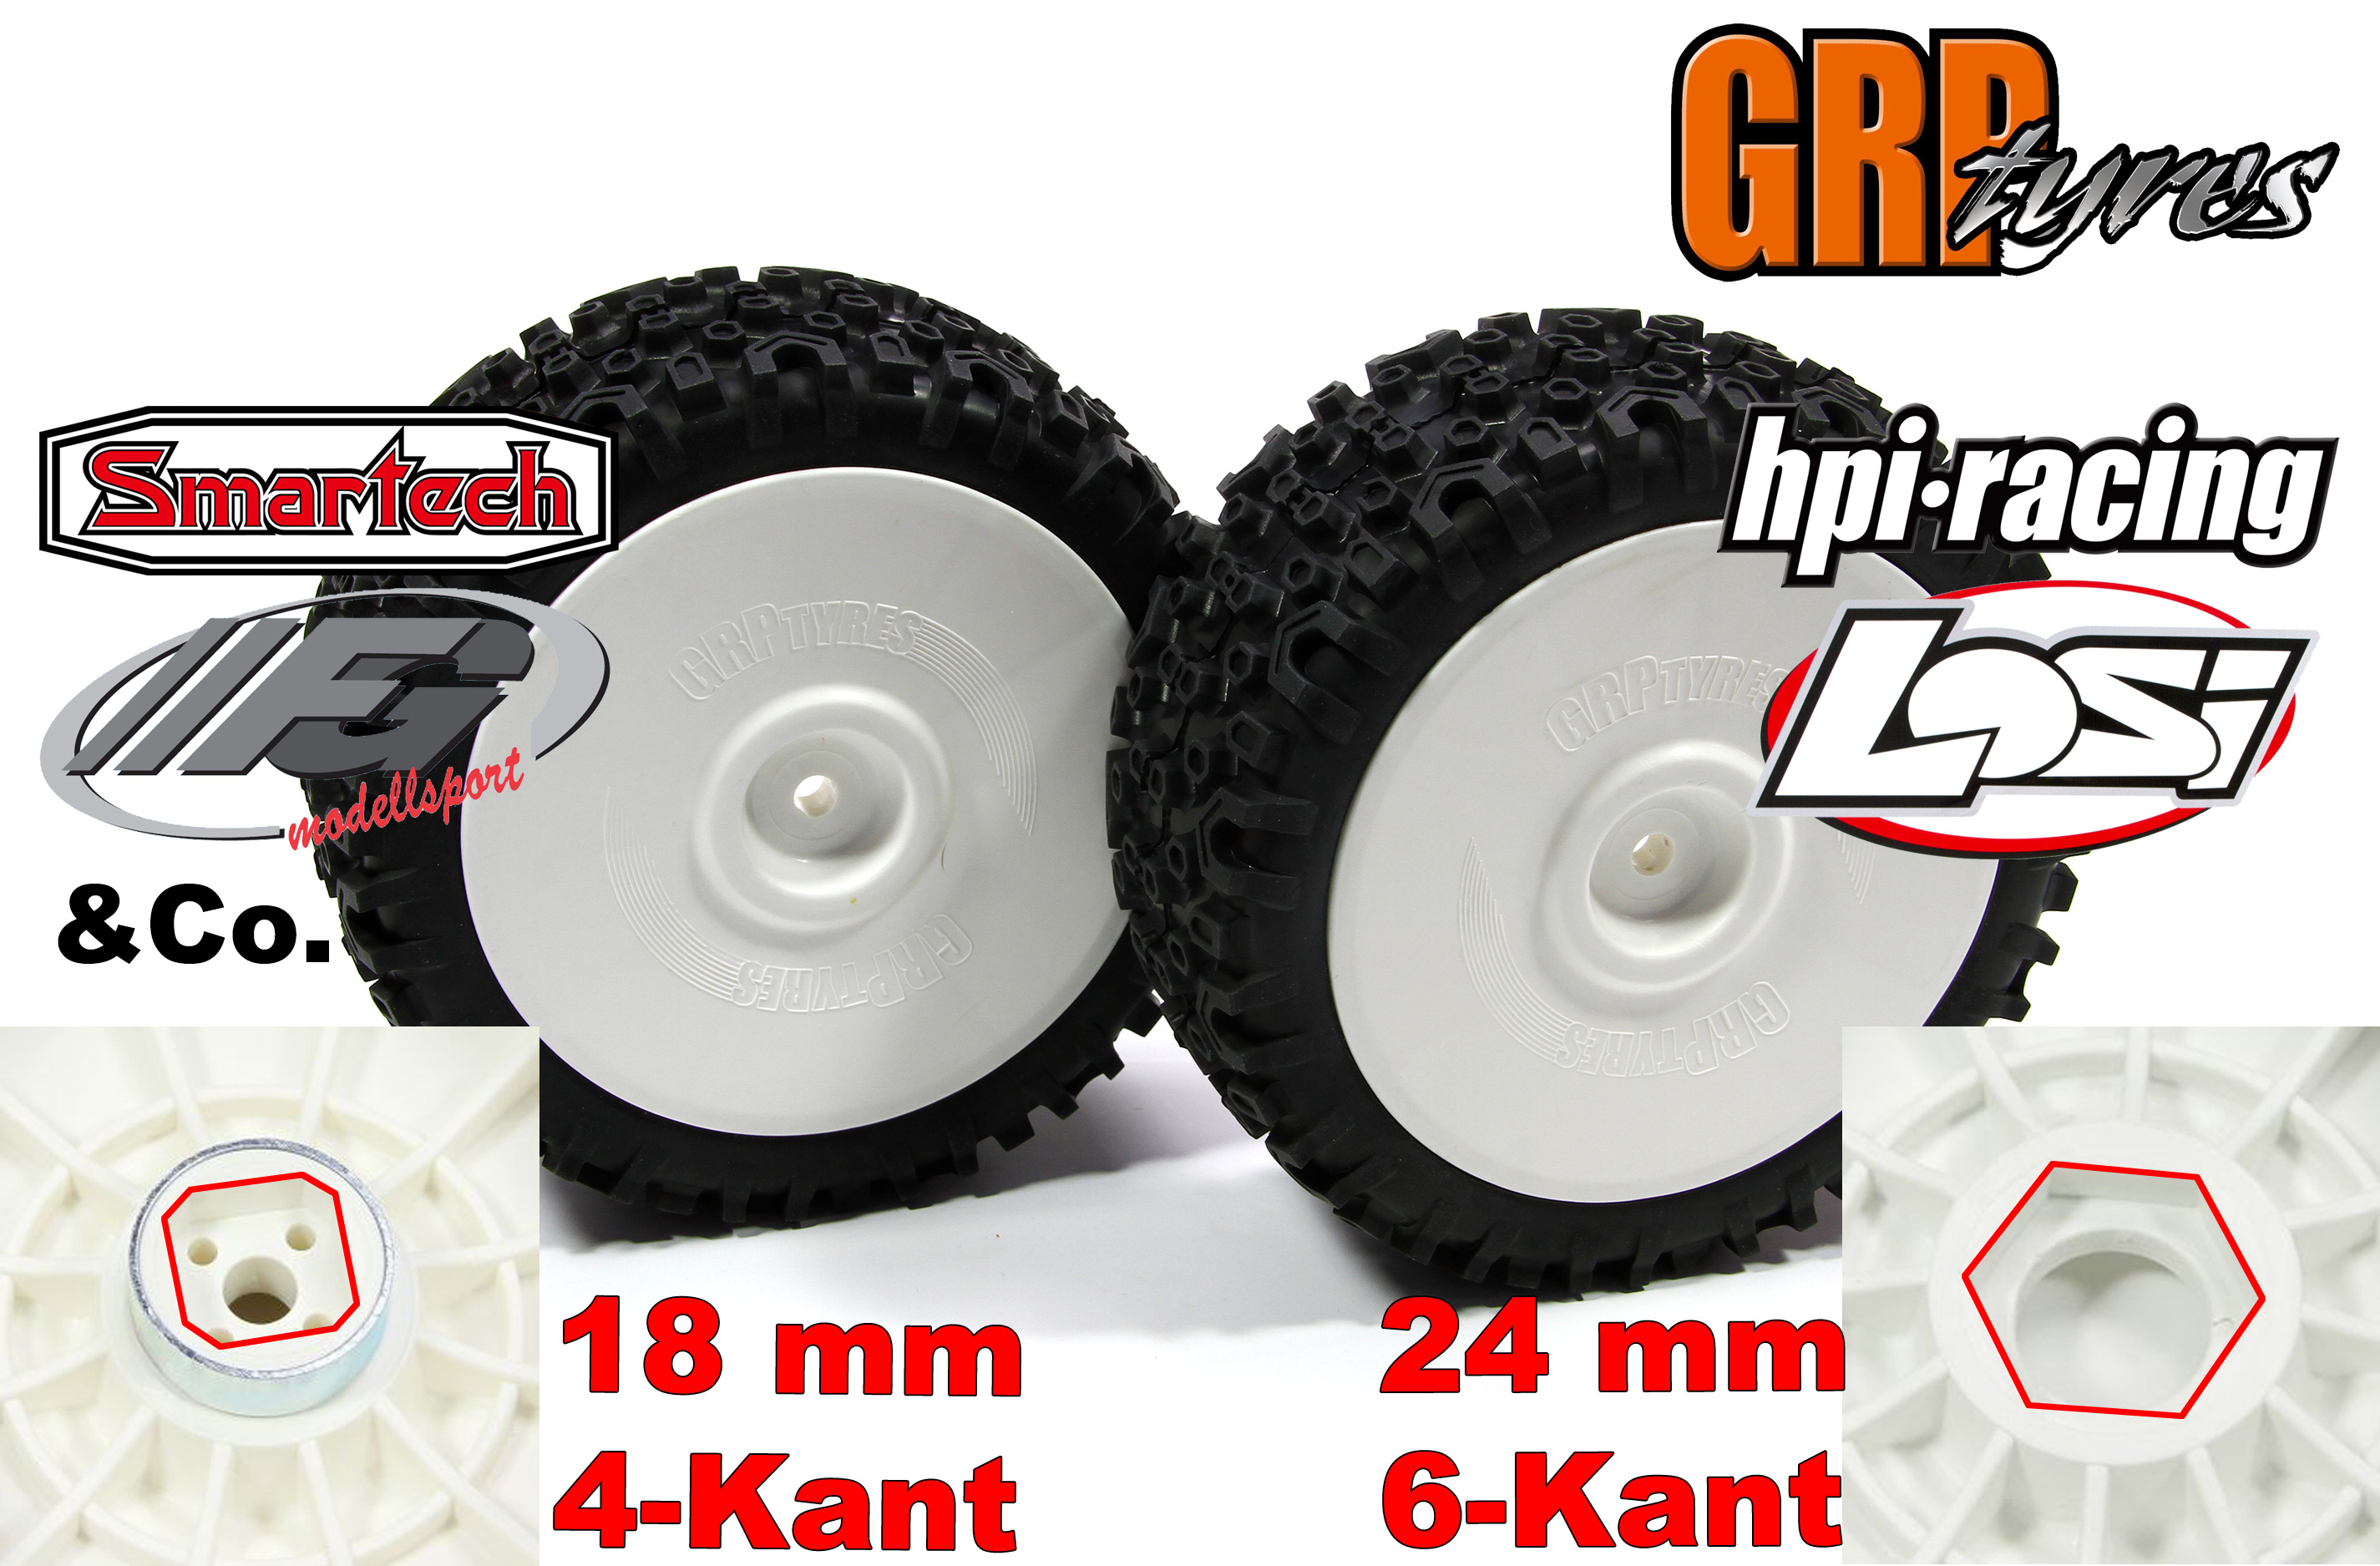 GW91 GRP-CROSS off-road race tires (S and P), complete glued on rims